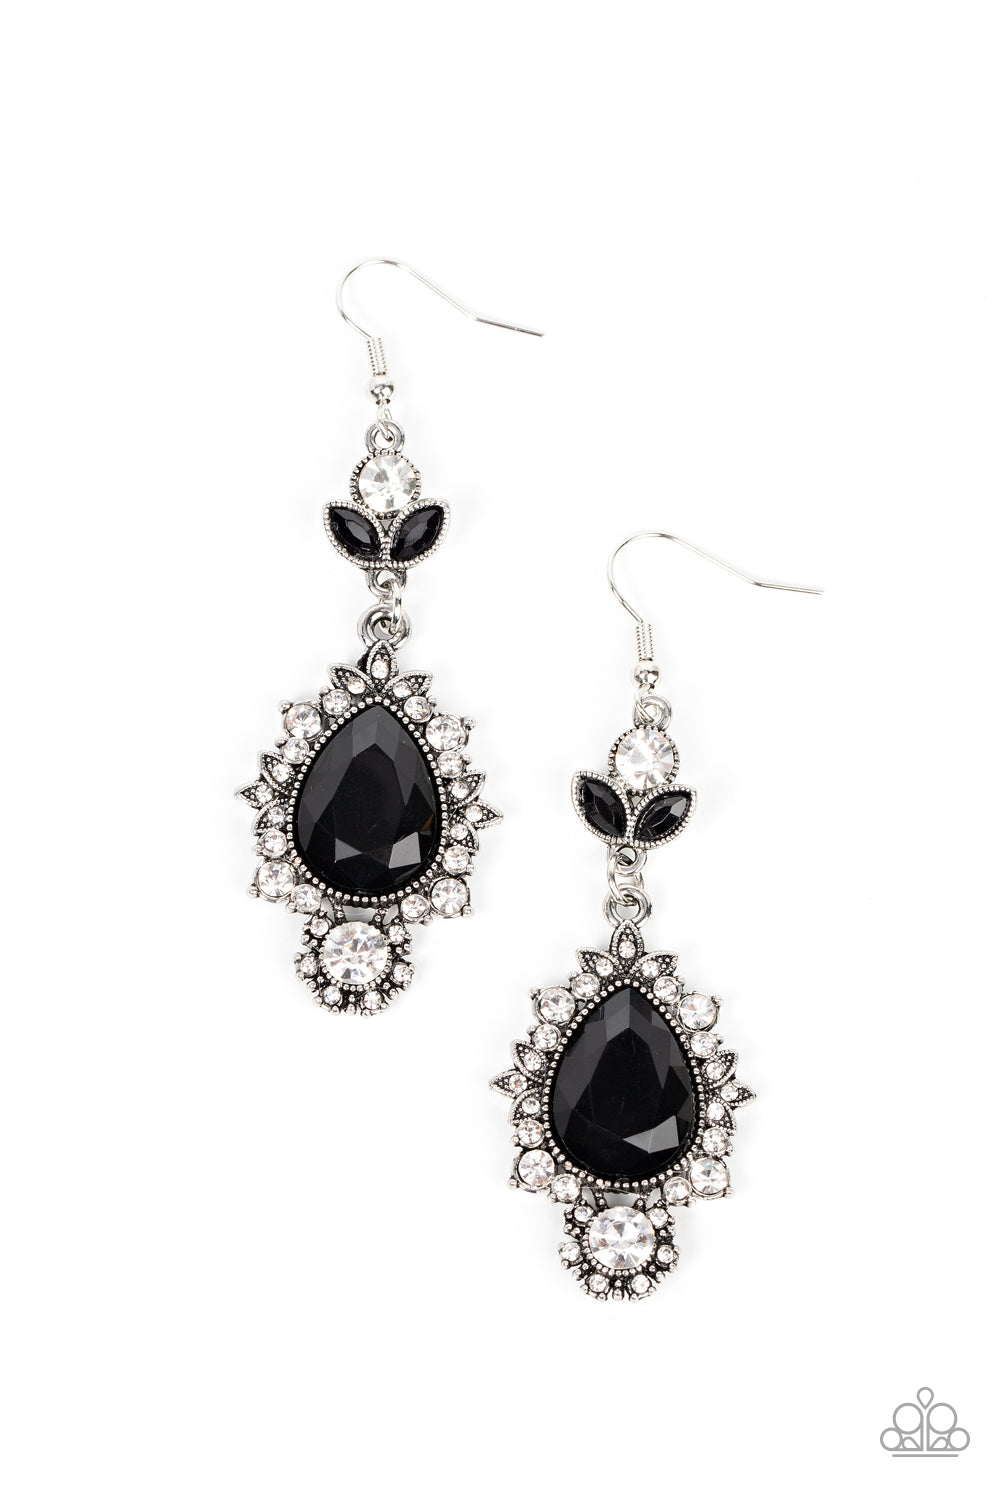 SELFIE-Esteem - Black and Silver Earrings - Paparazzi Accessories Bejeweled Accessories By Kristie - Trendy fashion jewelry for everyone -